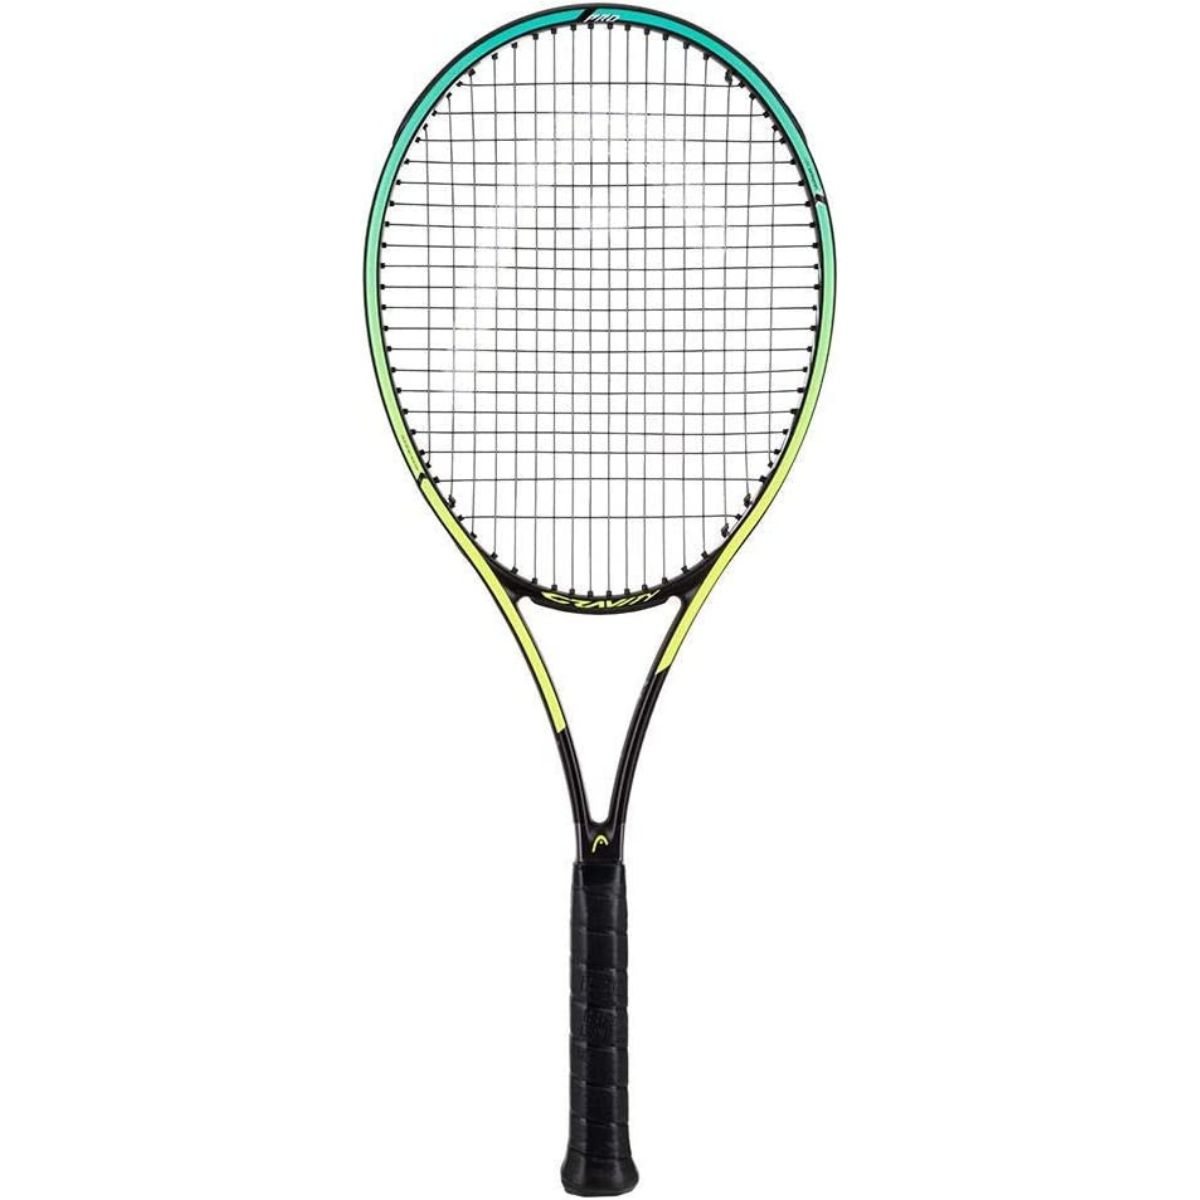 The Best Tennis Rackets for Advanced Players Options: Head Gravity Pro